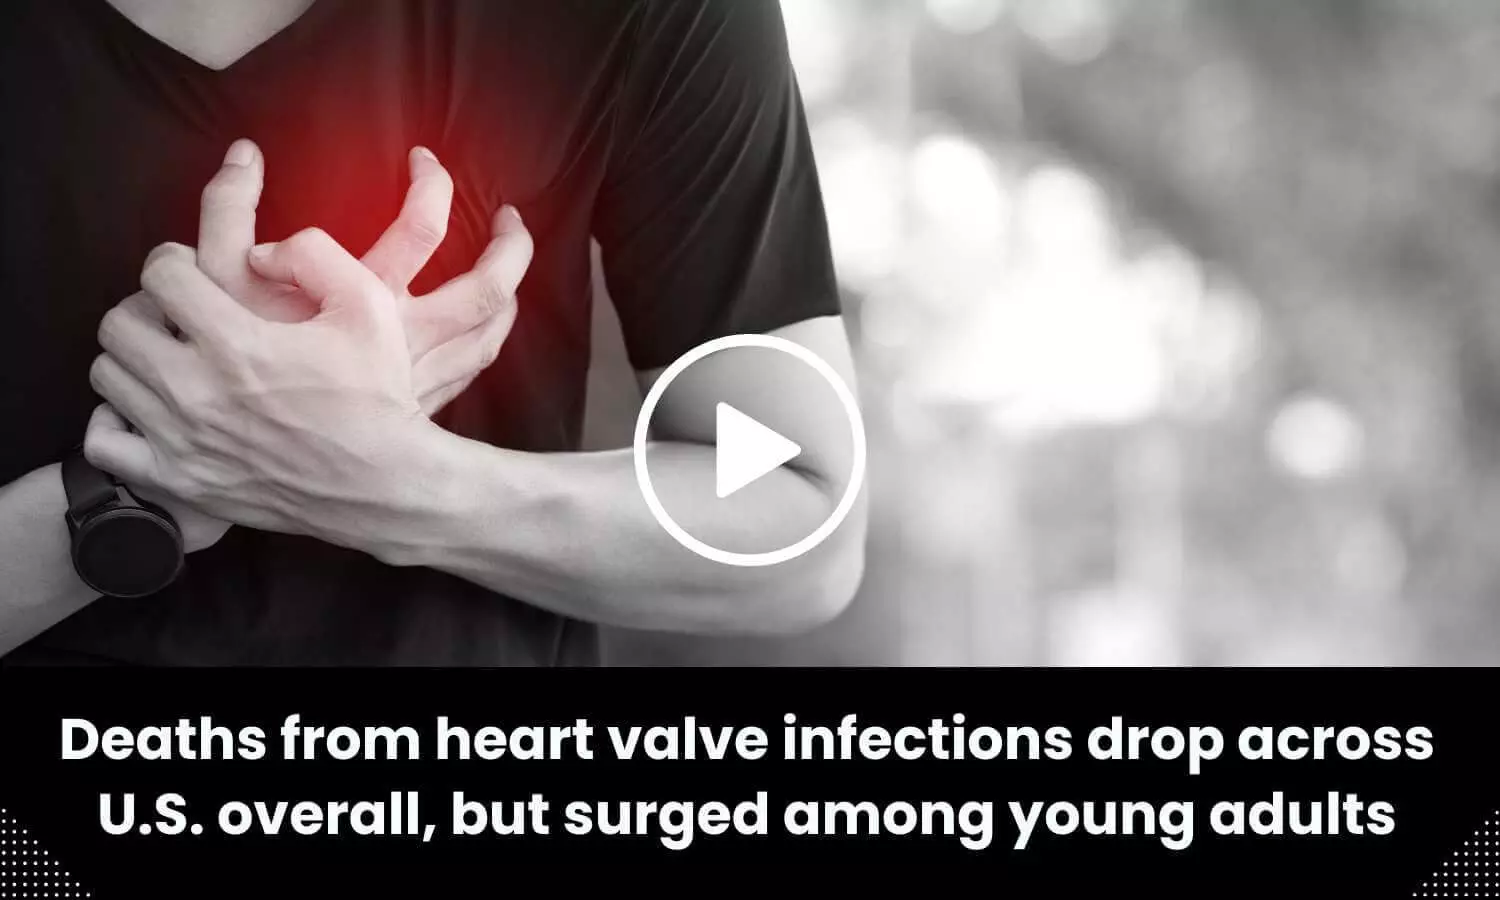 Deaths from heart valve infections dropped but rose in young adults in U.S